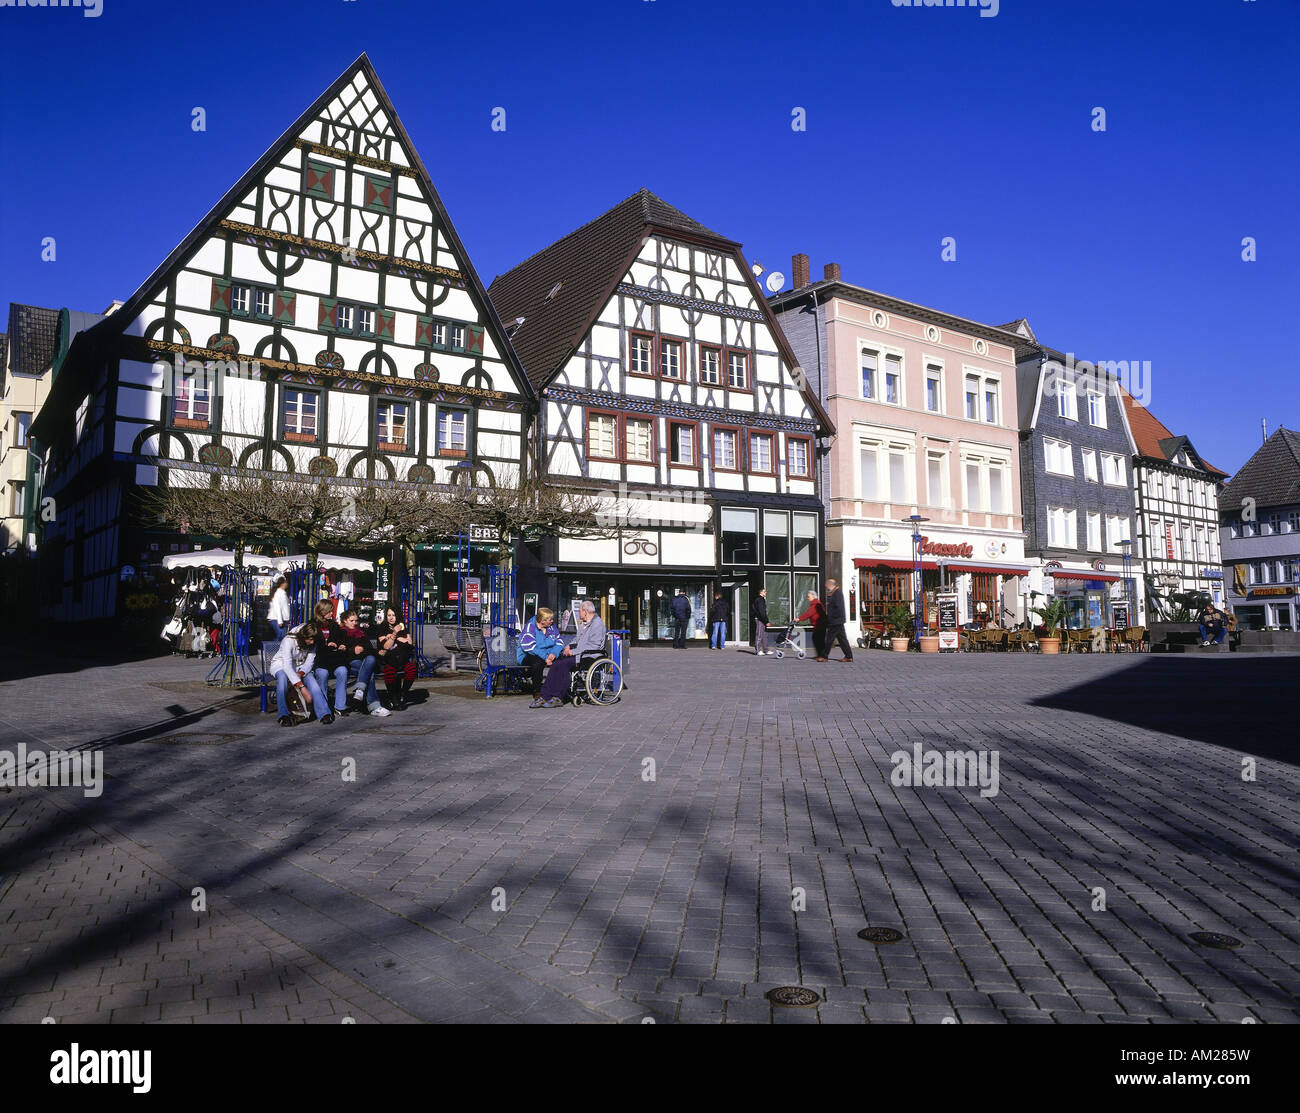 geography / travel, Germany, North Rhine-Westphalia, Unna, squares, marketplace, half-timbered houses, Additional-Rights-Clearance-Info-Not-Available Stock Photo